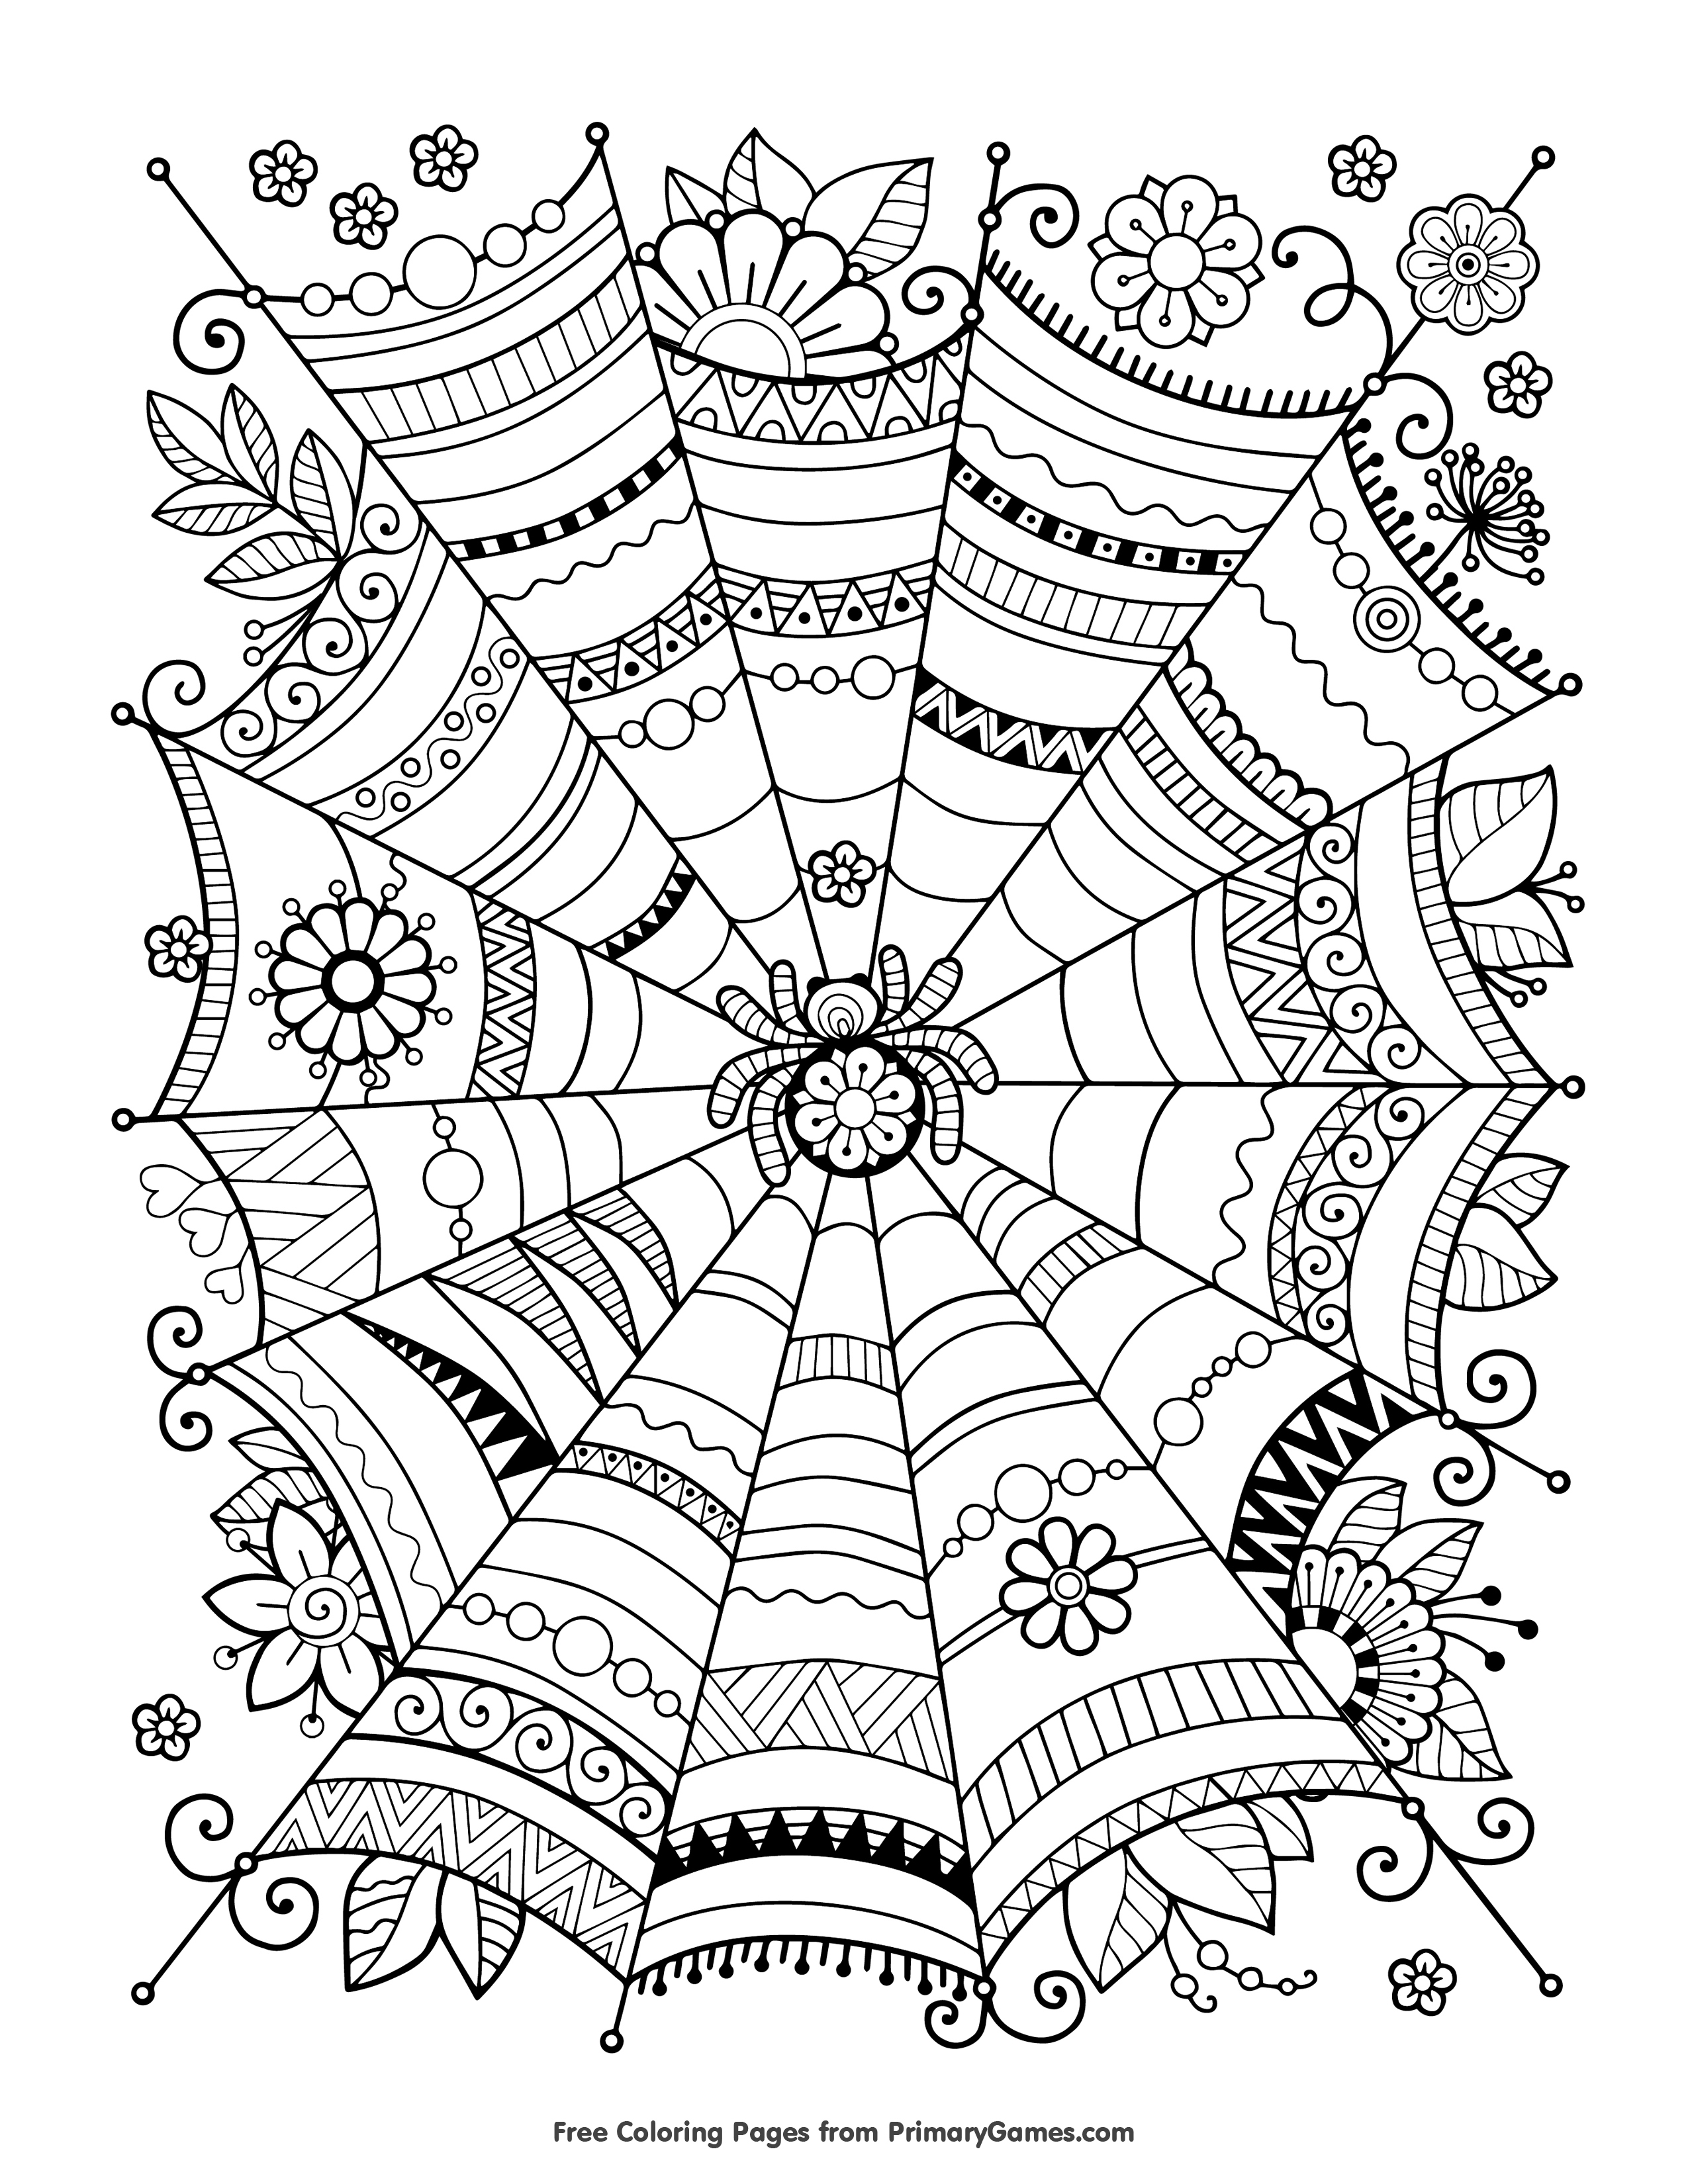 Free Halloween Coloring Pages For Adults &amp;amp; Kids - Happiness Is Homemade - Free Printable Halloween Coloring Pages